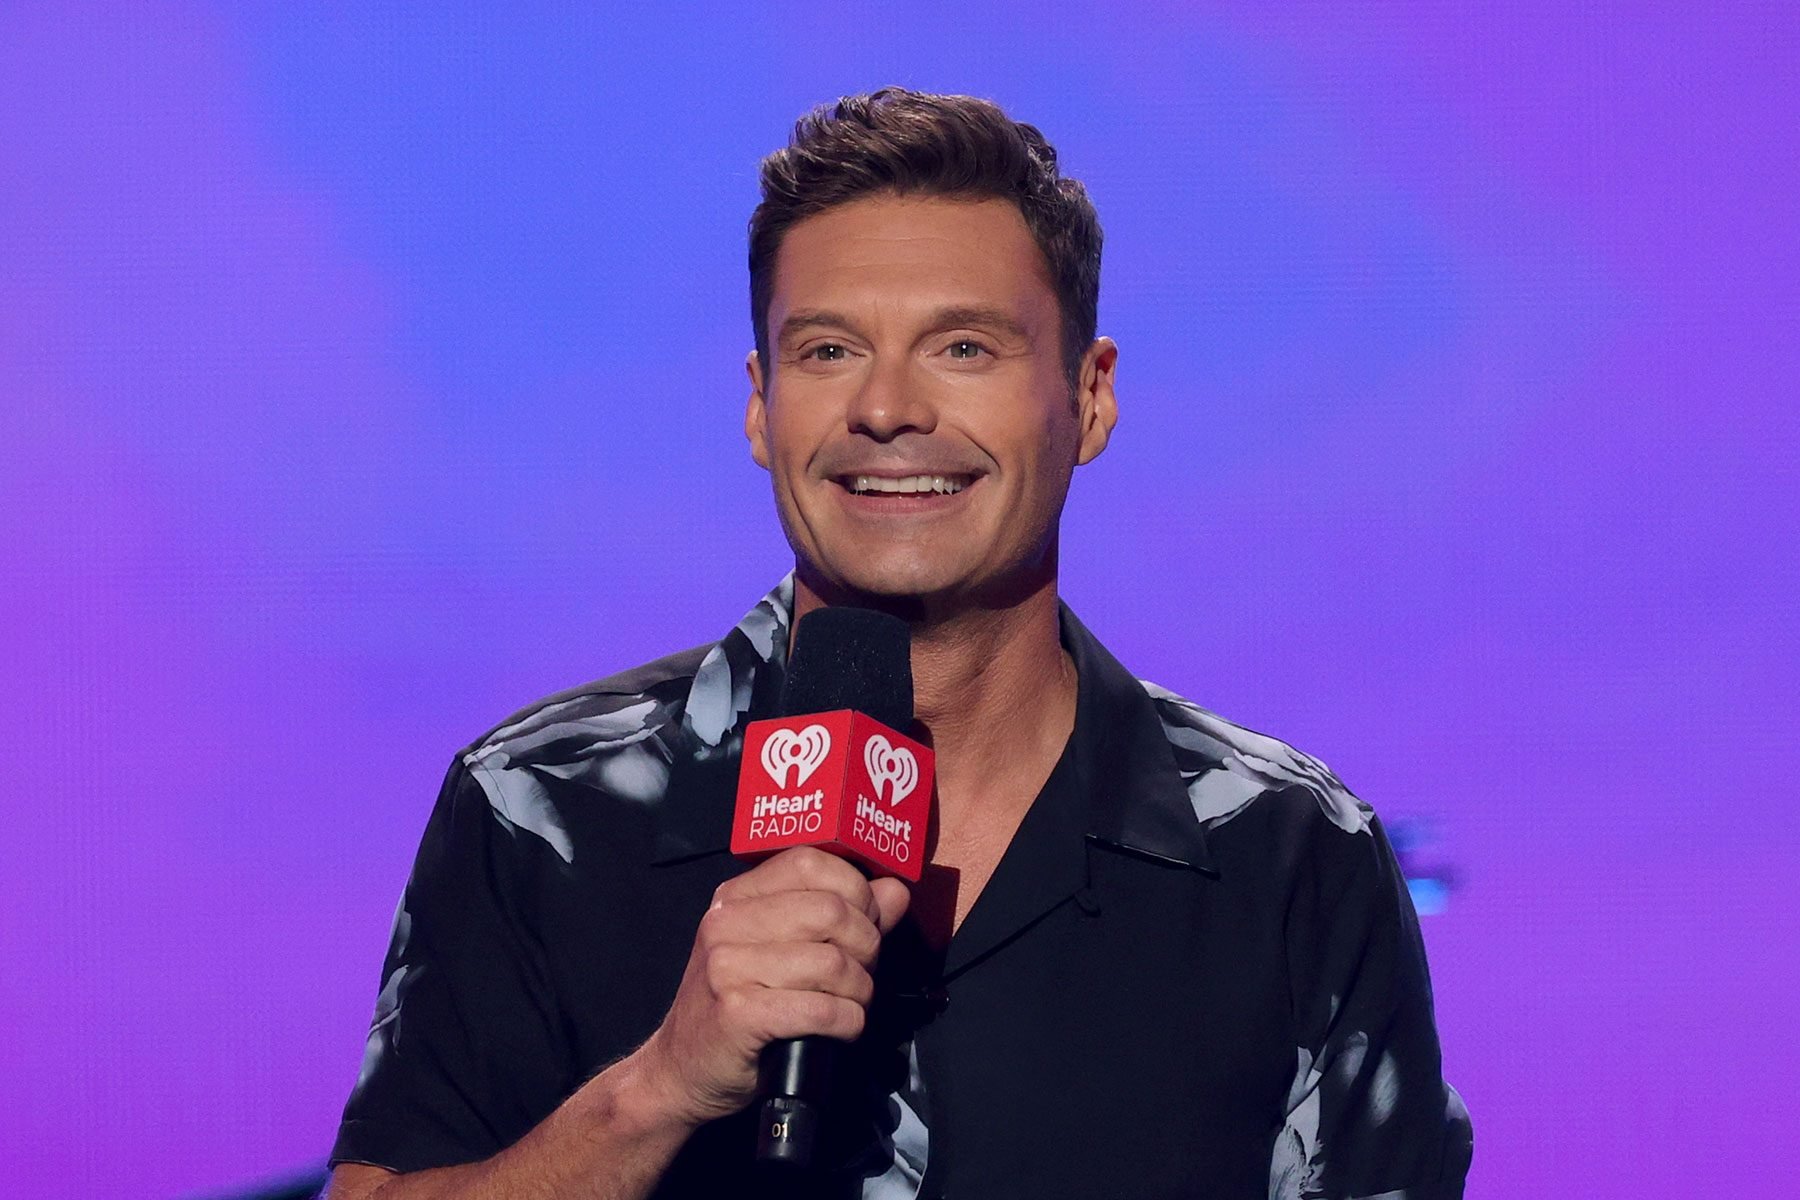 Ryan Seacrest speaks onstage during the 2021 iHeartRadio Music Festival at T-Mobile Arena in Las Vegas, Nevada